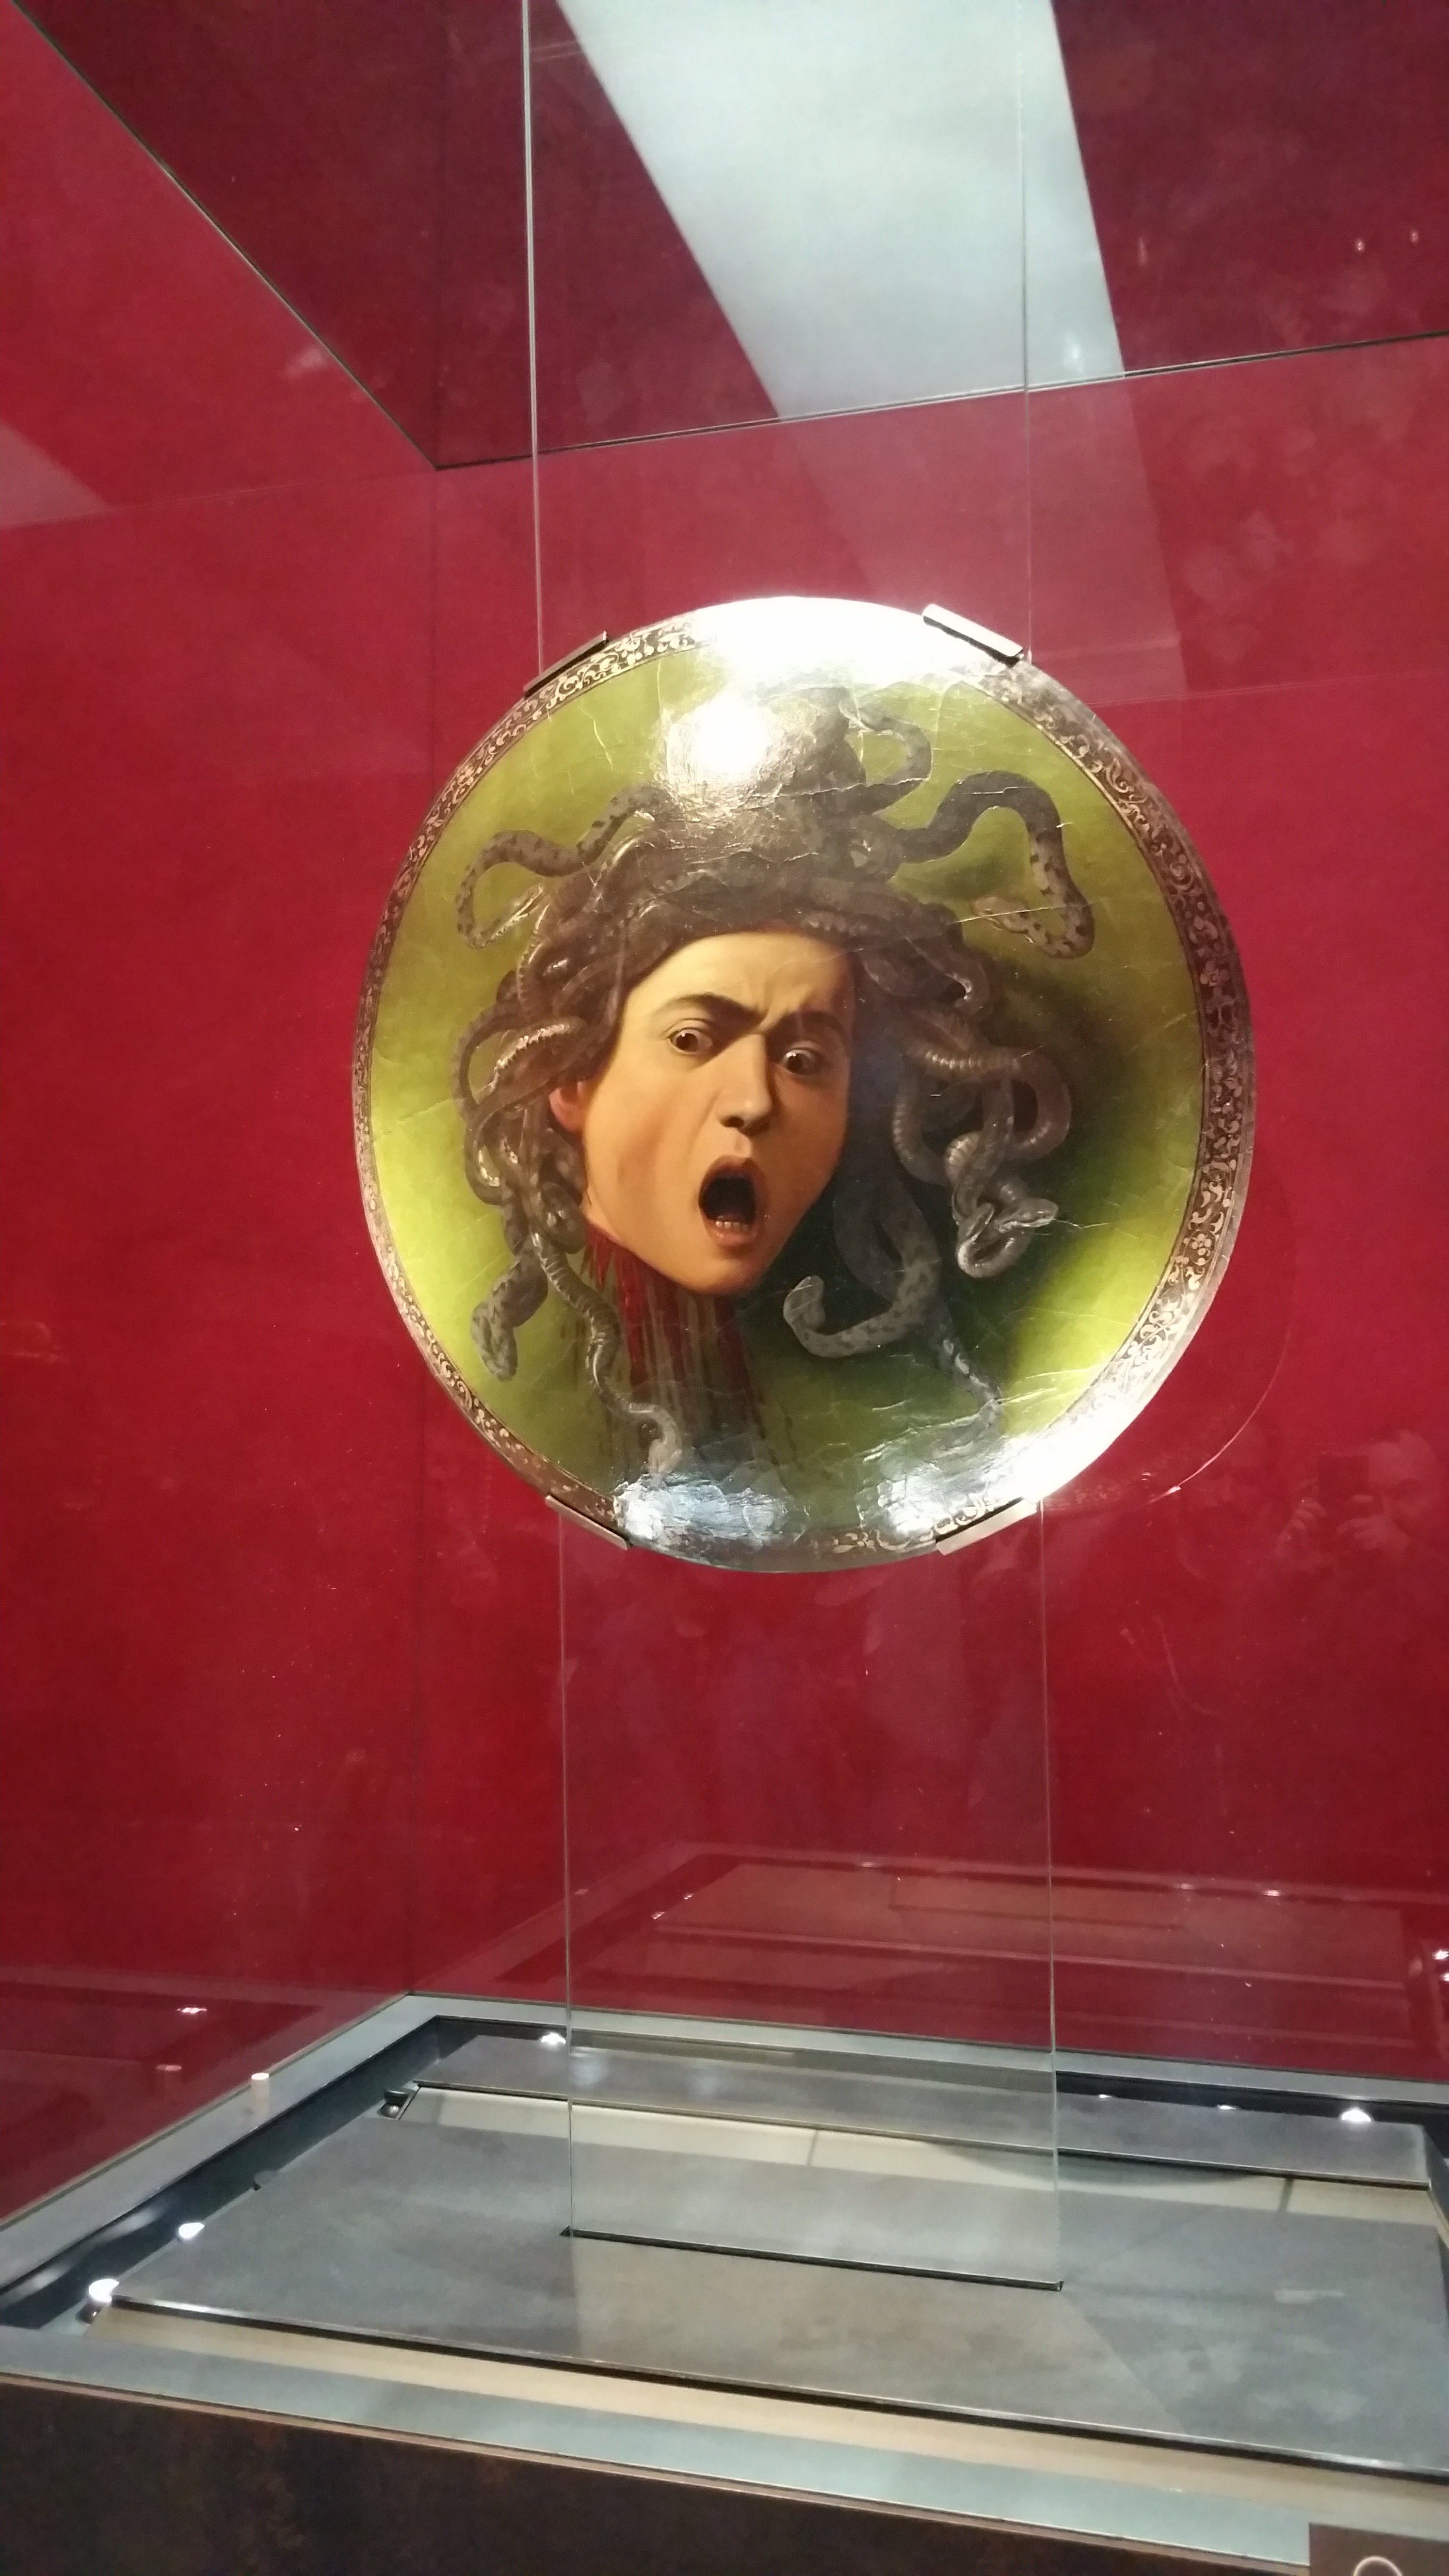 Caption: Shield of Medusa from Caravaggio in Uffizi's gallery ( Florence- Italy)